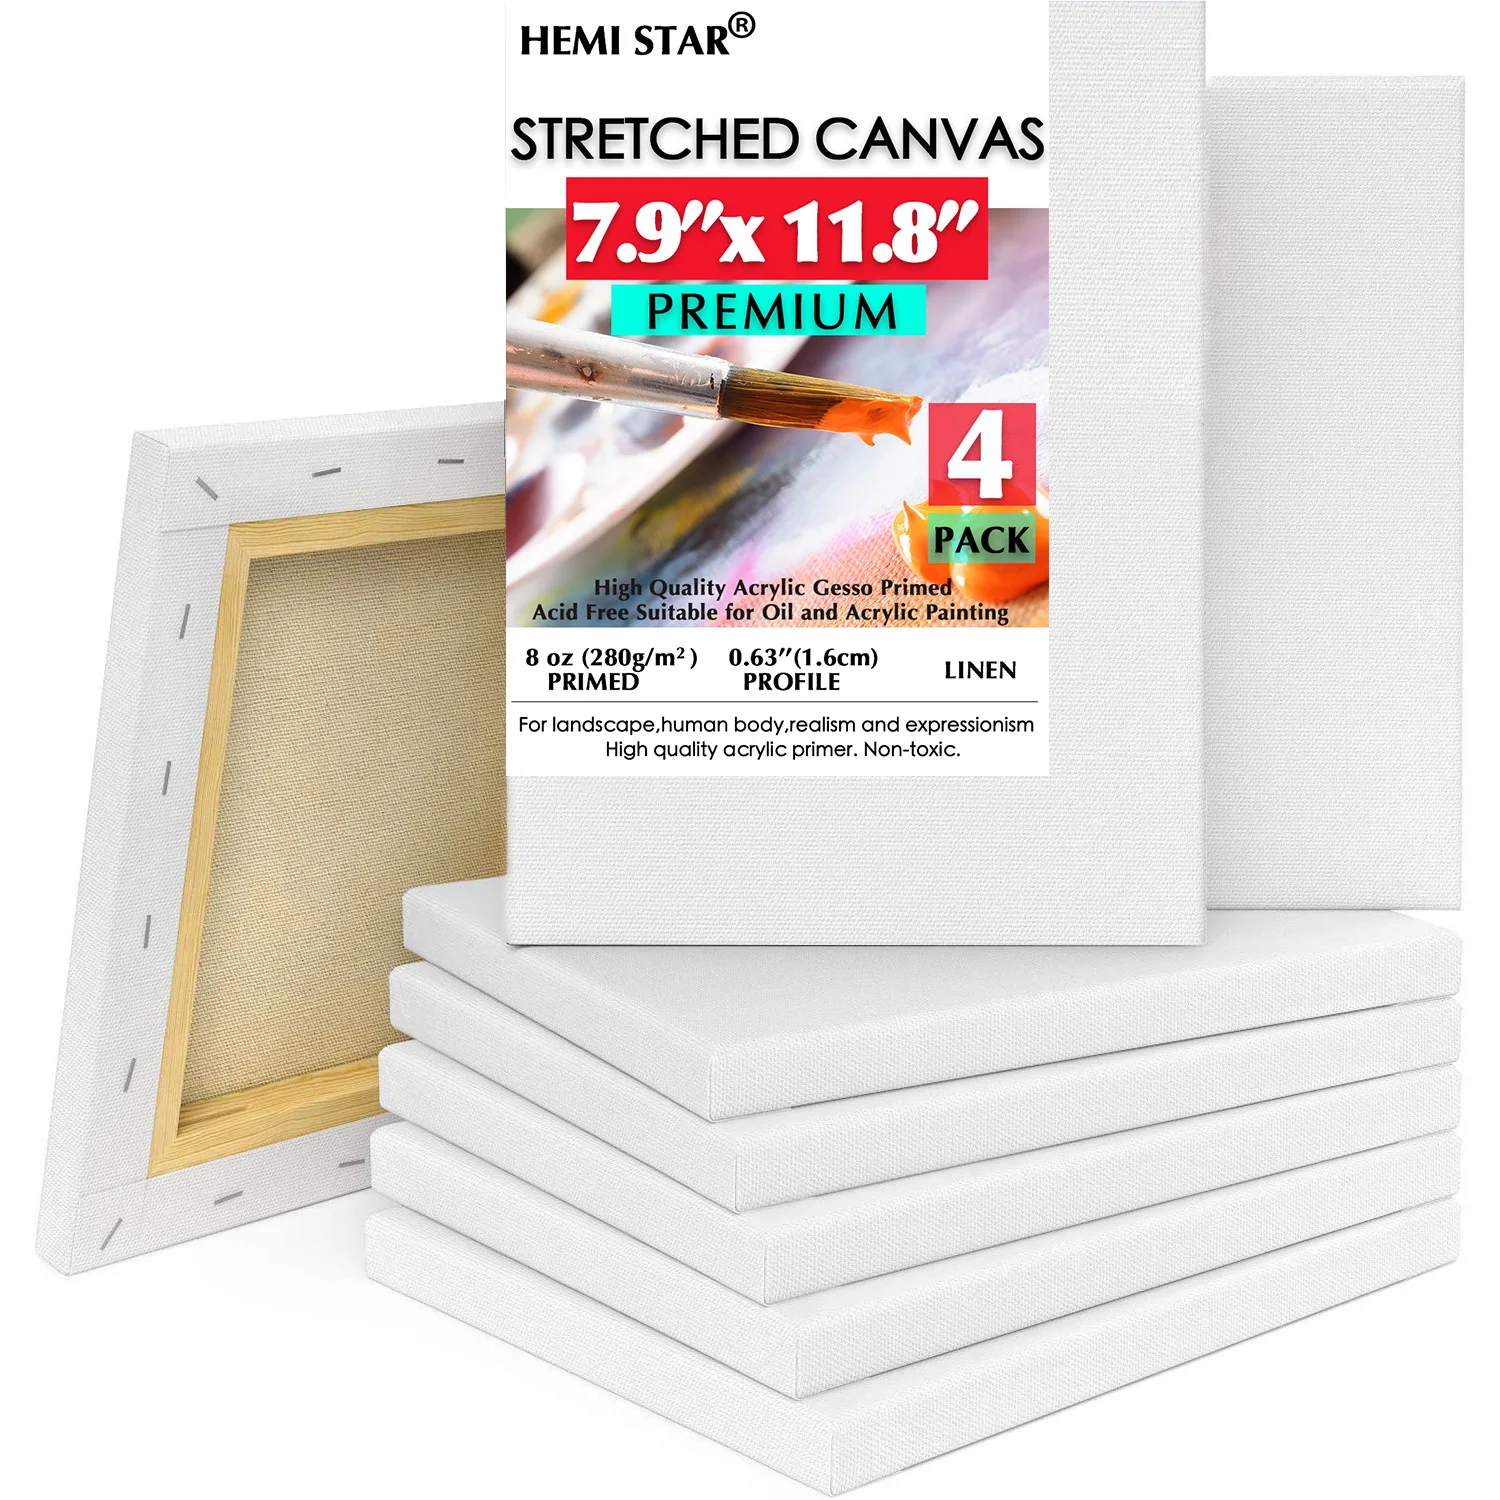 

4 Pack Stretched Canvases for Painting Linen Blank Canvas 20x30cm-7.9x11.8 Blank Canvas Boards for Painting 8 oz Gesso-Primed